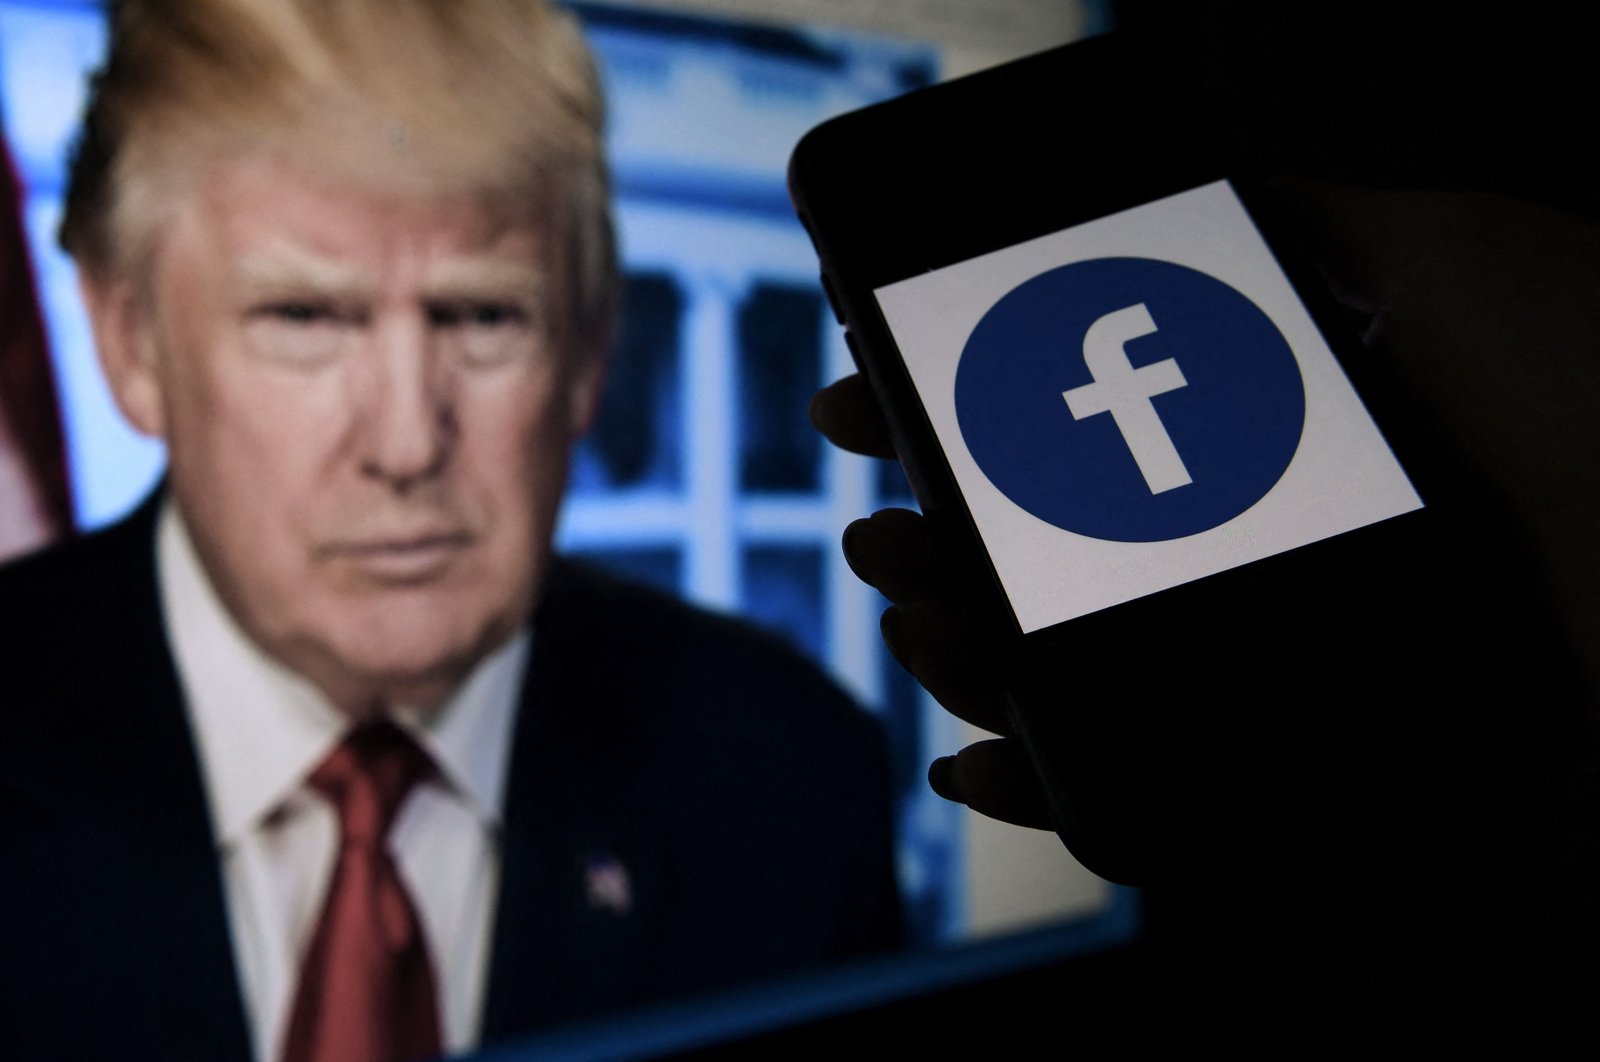 A phone screen displays a Facebook logo with the official portrait of former US President Donald Trump in the background in Arlington, Virginia, U.S., May 4, 2021. (AFP Photo)